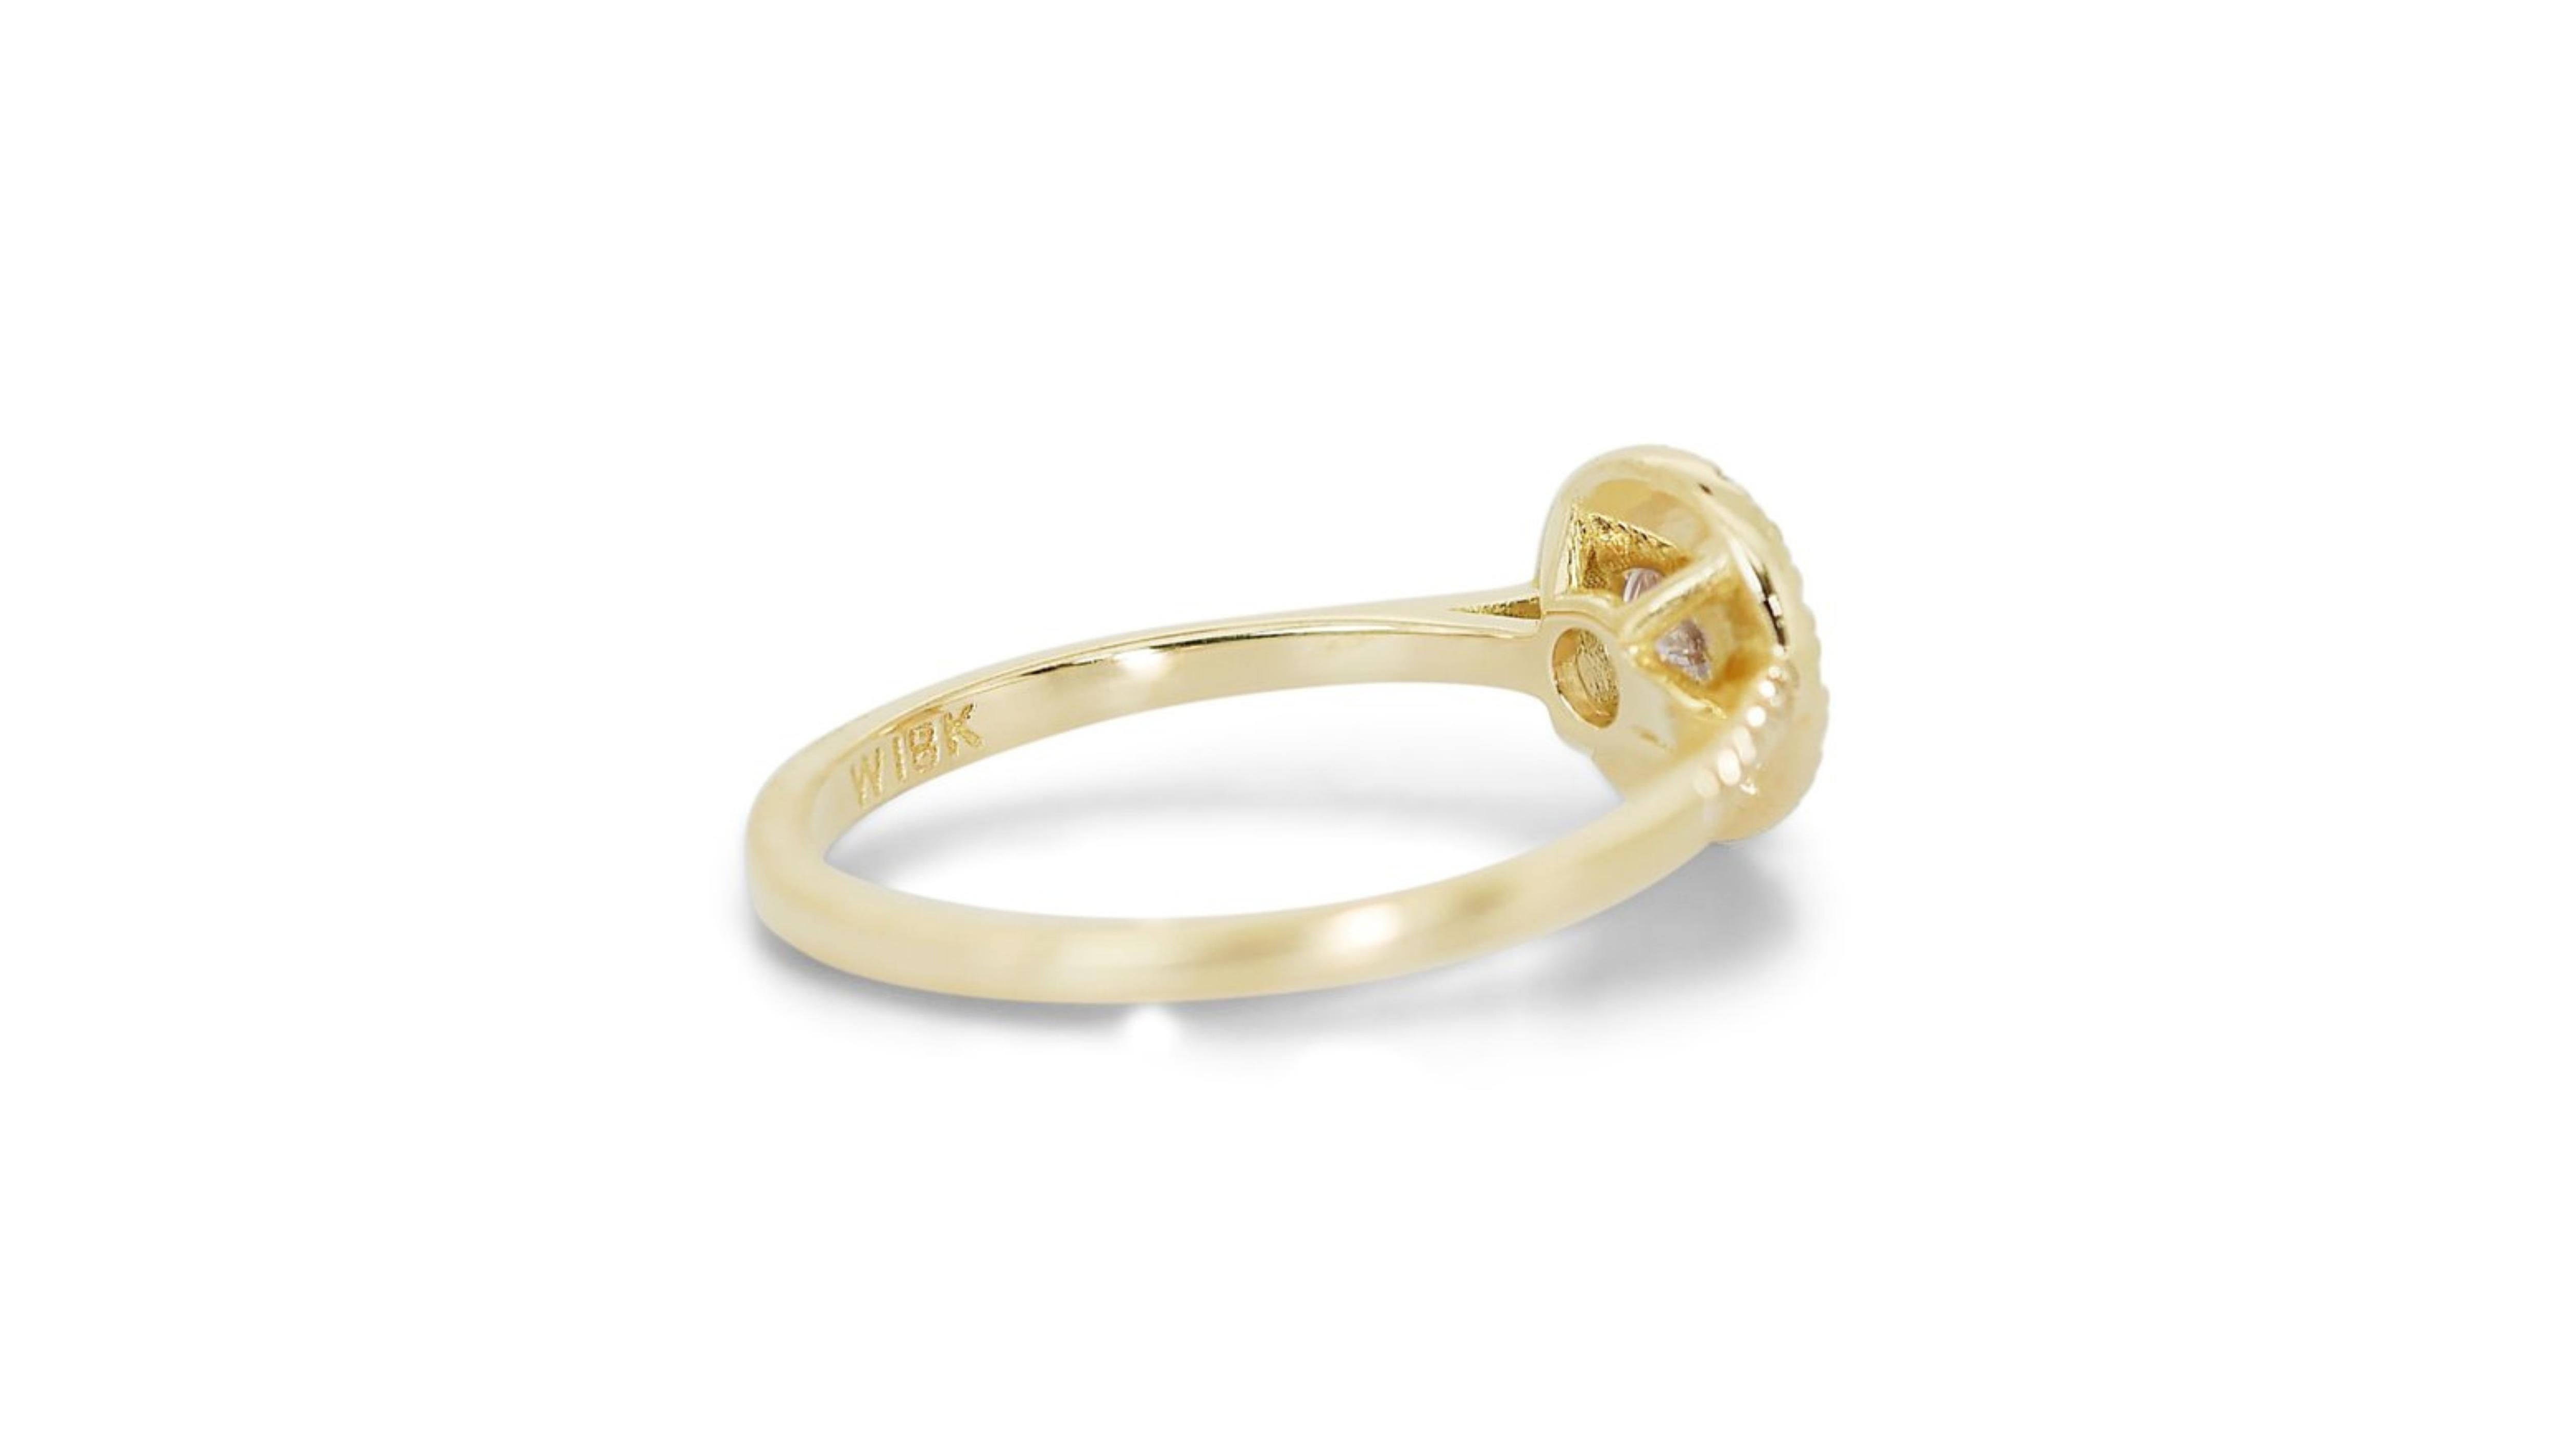 Women's or Men's Marvelous 18k Yellow Gold Ring with 2.6 carat Natural Diamond For Sale